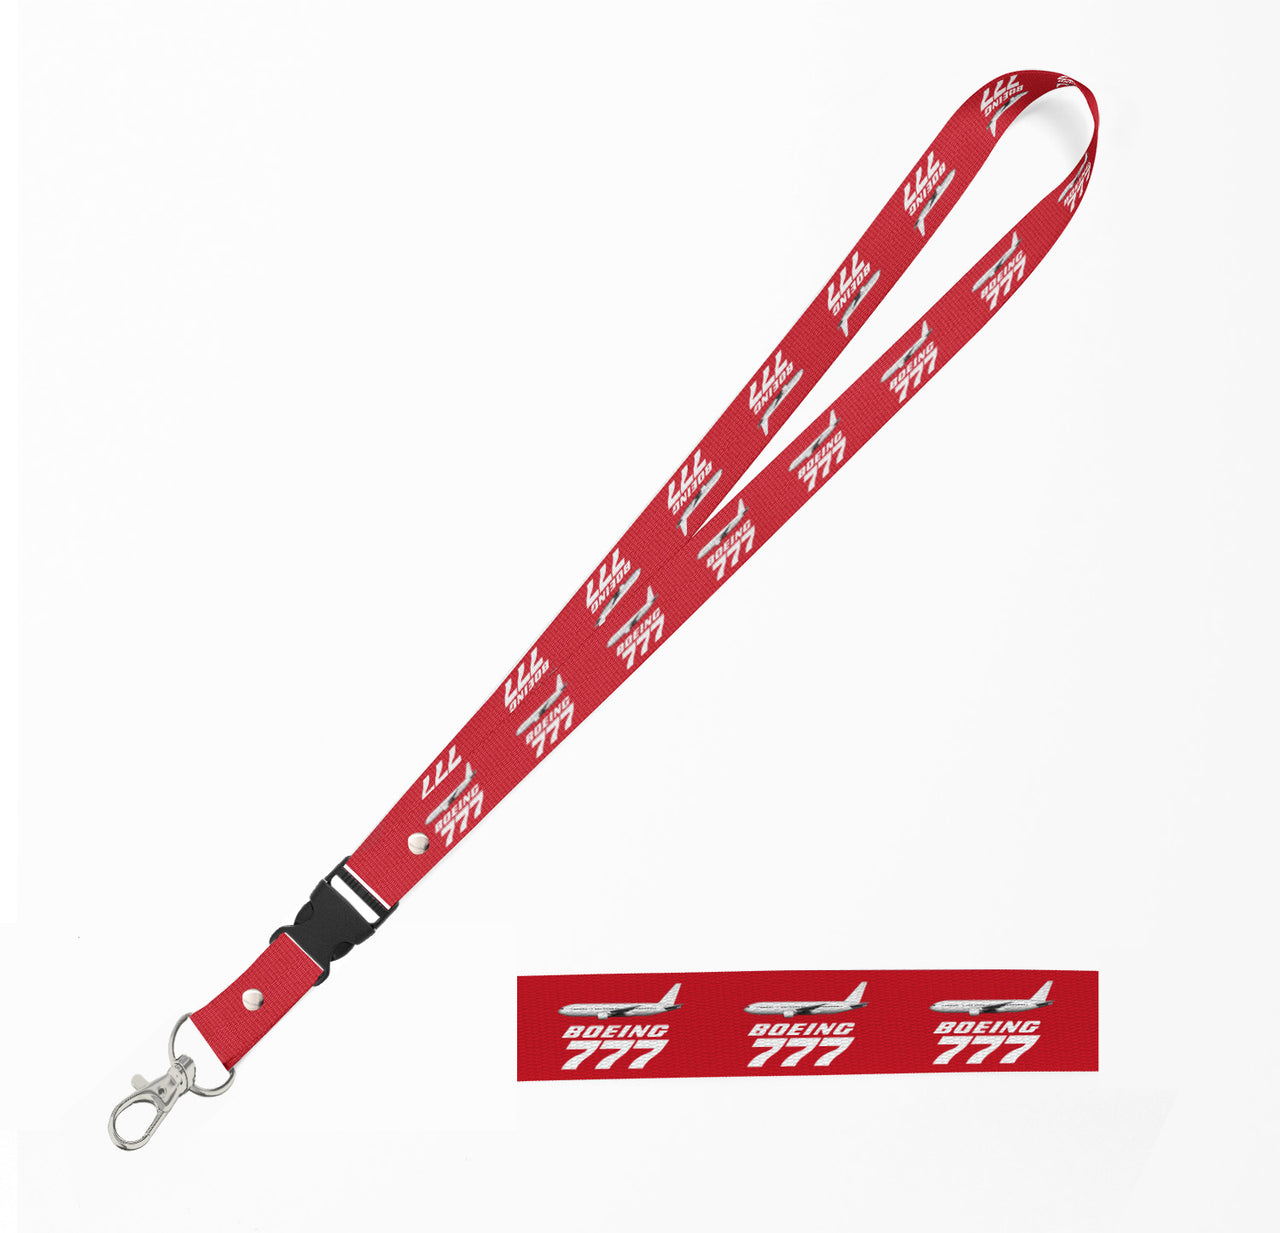 The Boeing 777 Designed Detachable Lanyard & ID Holders